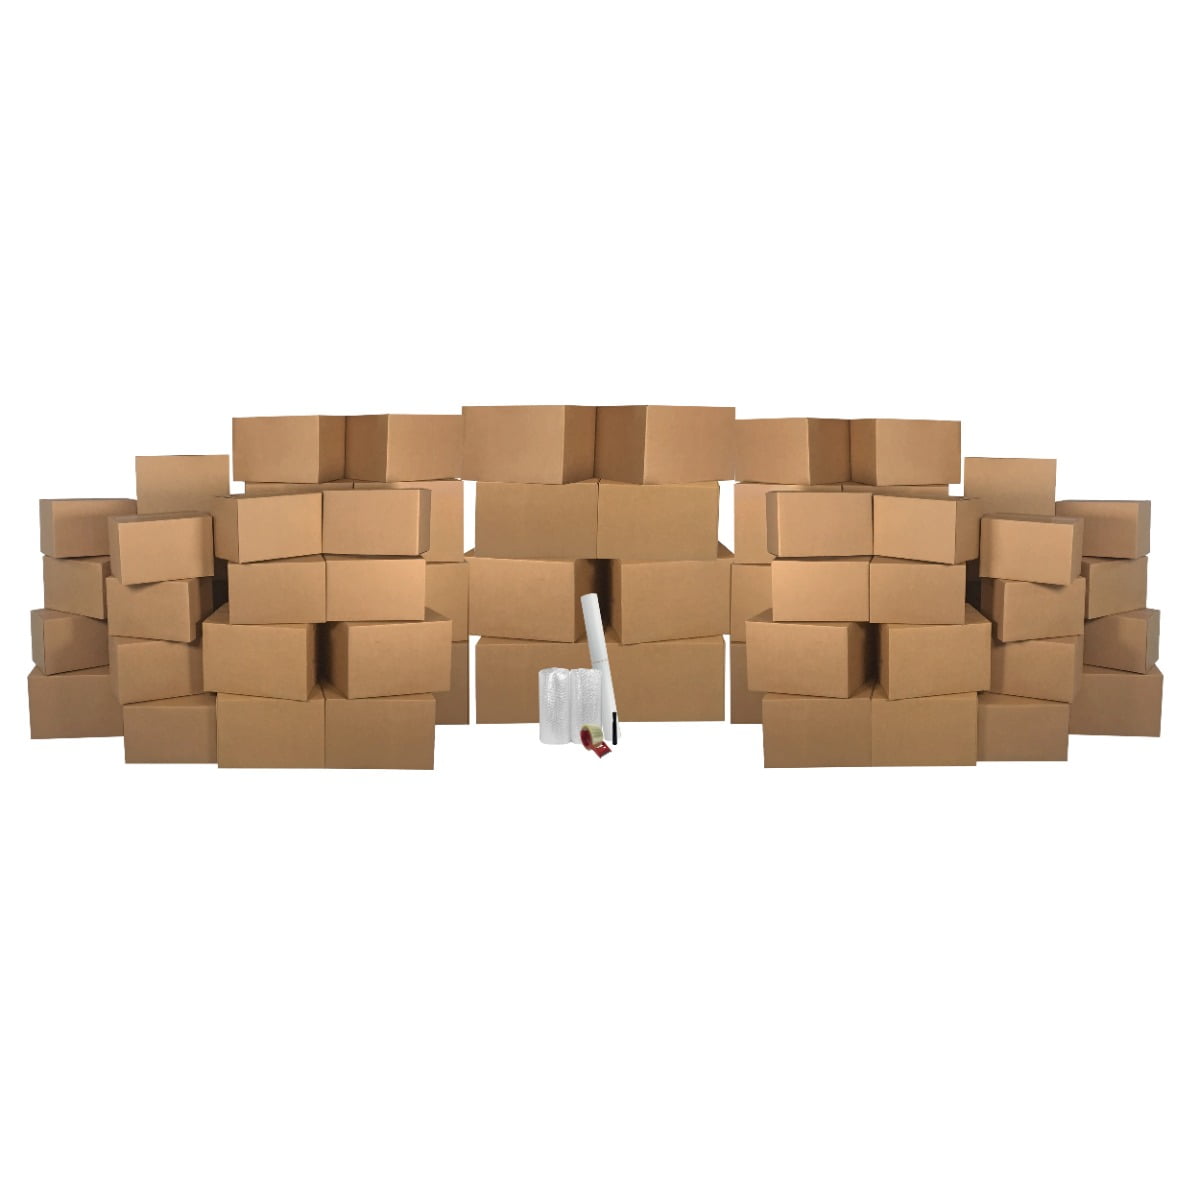 UBMOVE Basic Moving Box Kit for 5 Bedrooms 58 Boxes & Packing Materials